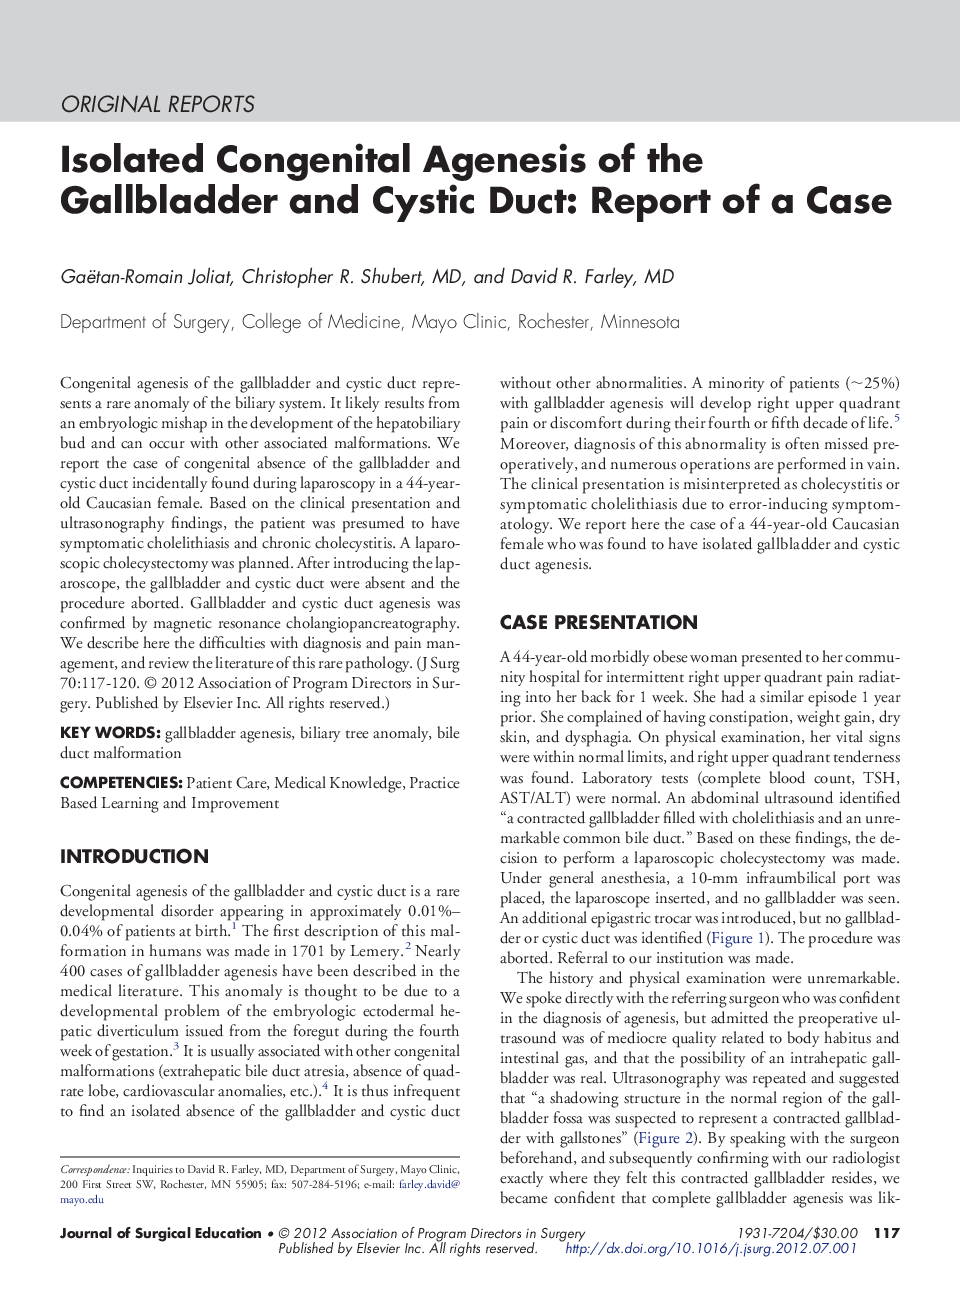 Isolated Congenital Agenesis of the Gallbladder and Cystic Duct: Report of a Case